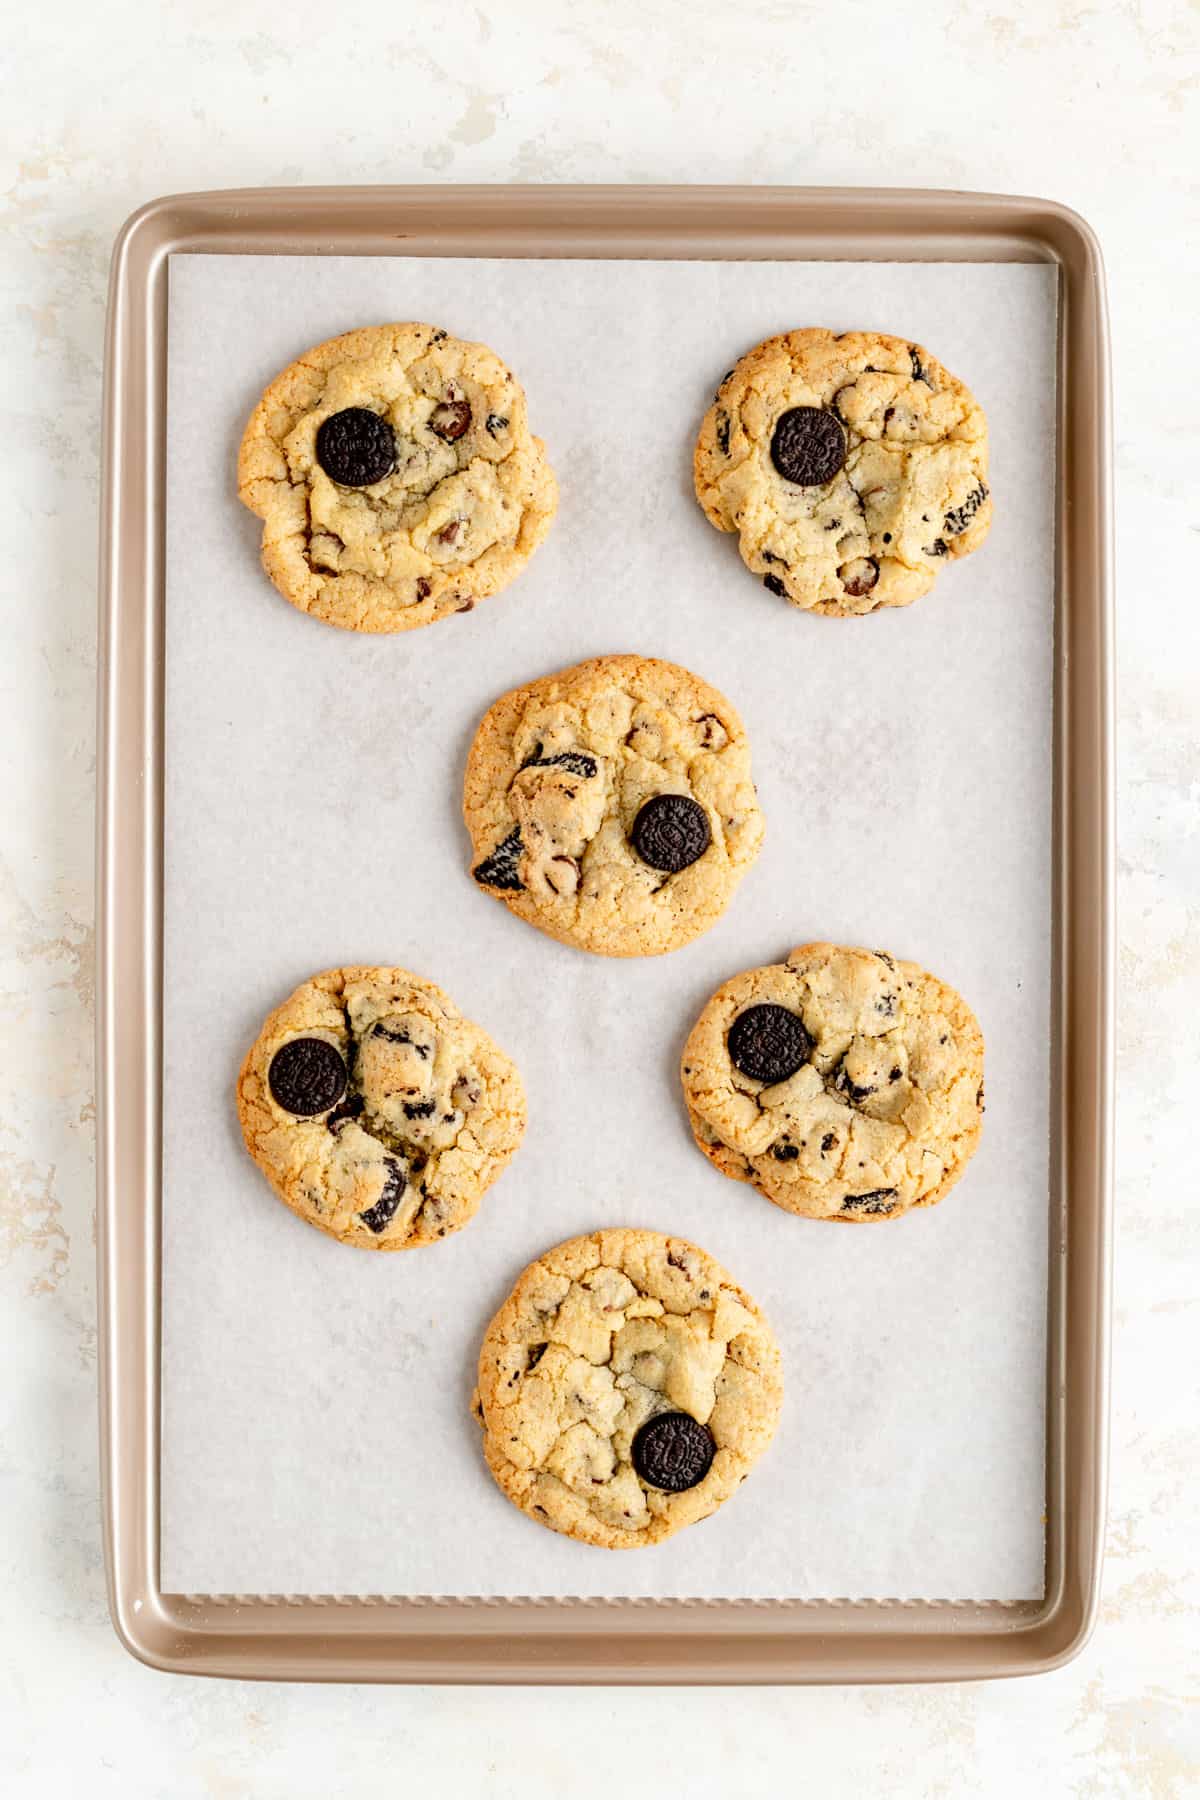 six baked oreo chocolate chip cookies on a parchment lined tan baking sheet.